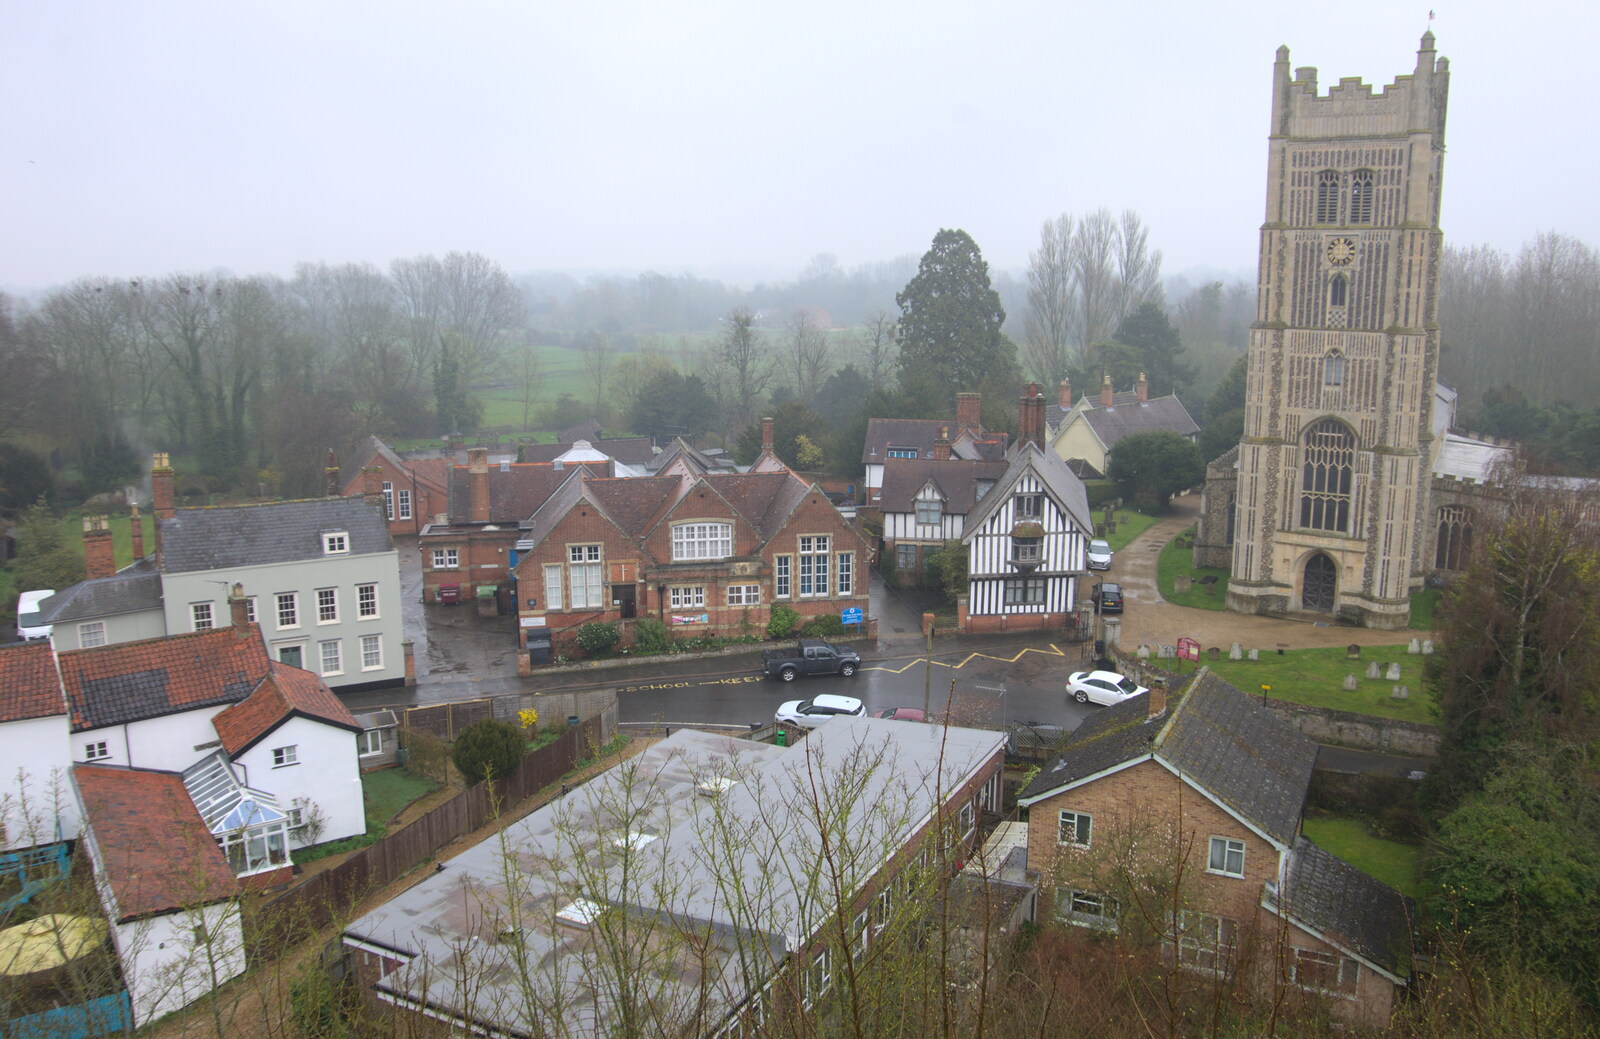 A view towards the school and church from Darts at the Beaky, and a Visit From Brussels, Occold and Thorndon, Suffolk - 9th April 2018